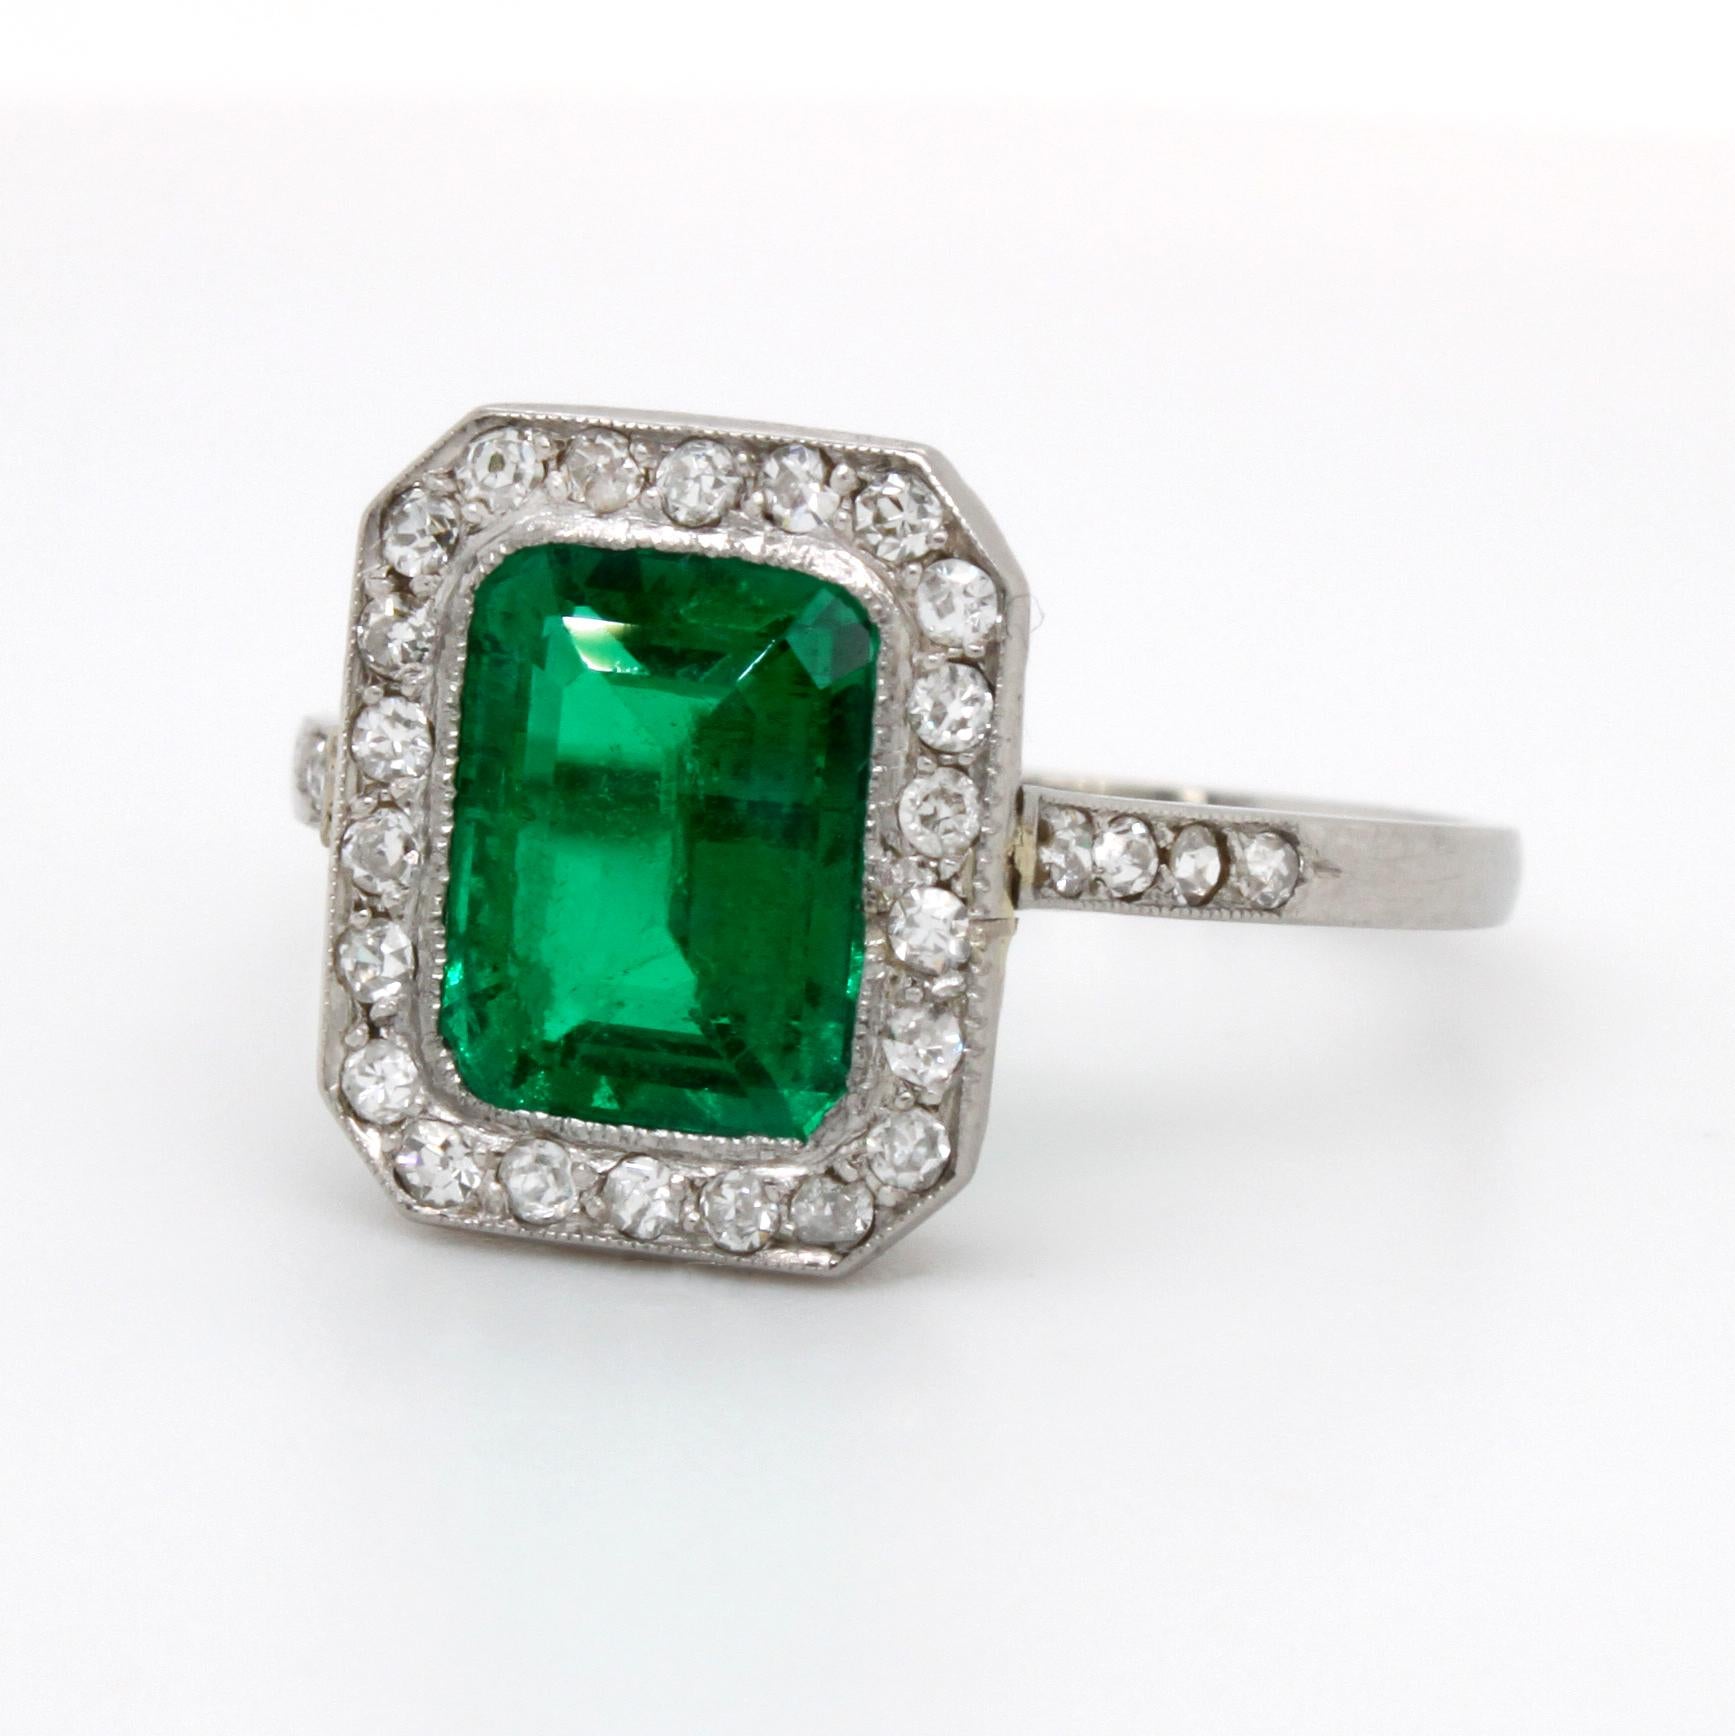 Edwardian Colombian Emerald and Diamond Ring, ca. 1910s

A beautiful and elegant ring set with a gem and old-mine Colombian emerald of ca. 1.6 carats and surrounded by diamonds of ca. 0.5 carats. The crown of the ring is made with a detailed